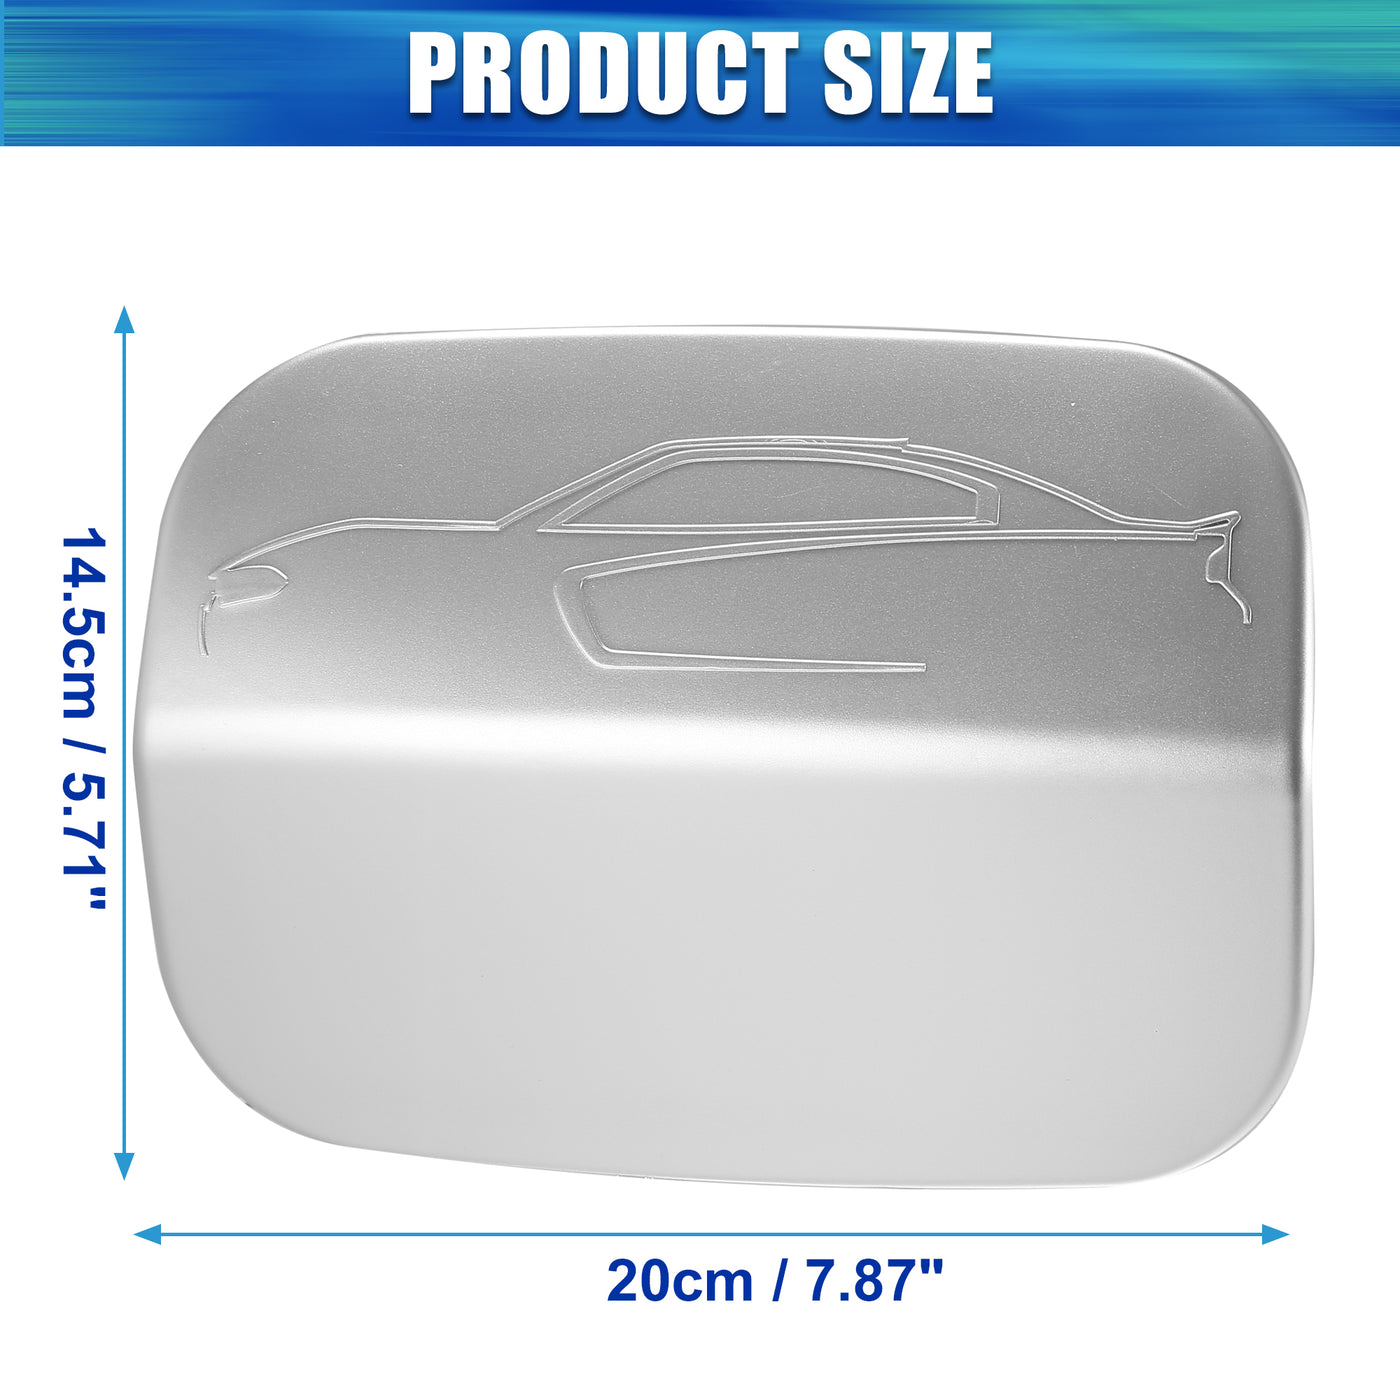 X AUTOHAUX Silver Tone Fuel Tank Cover Door Gas Filler Cap Cover Replacement Accessories for Dodge Charger 2011-2021